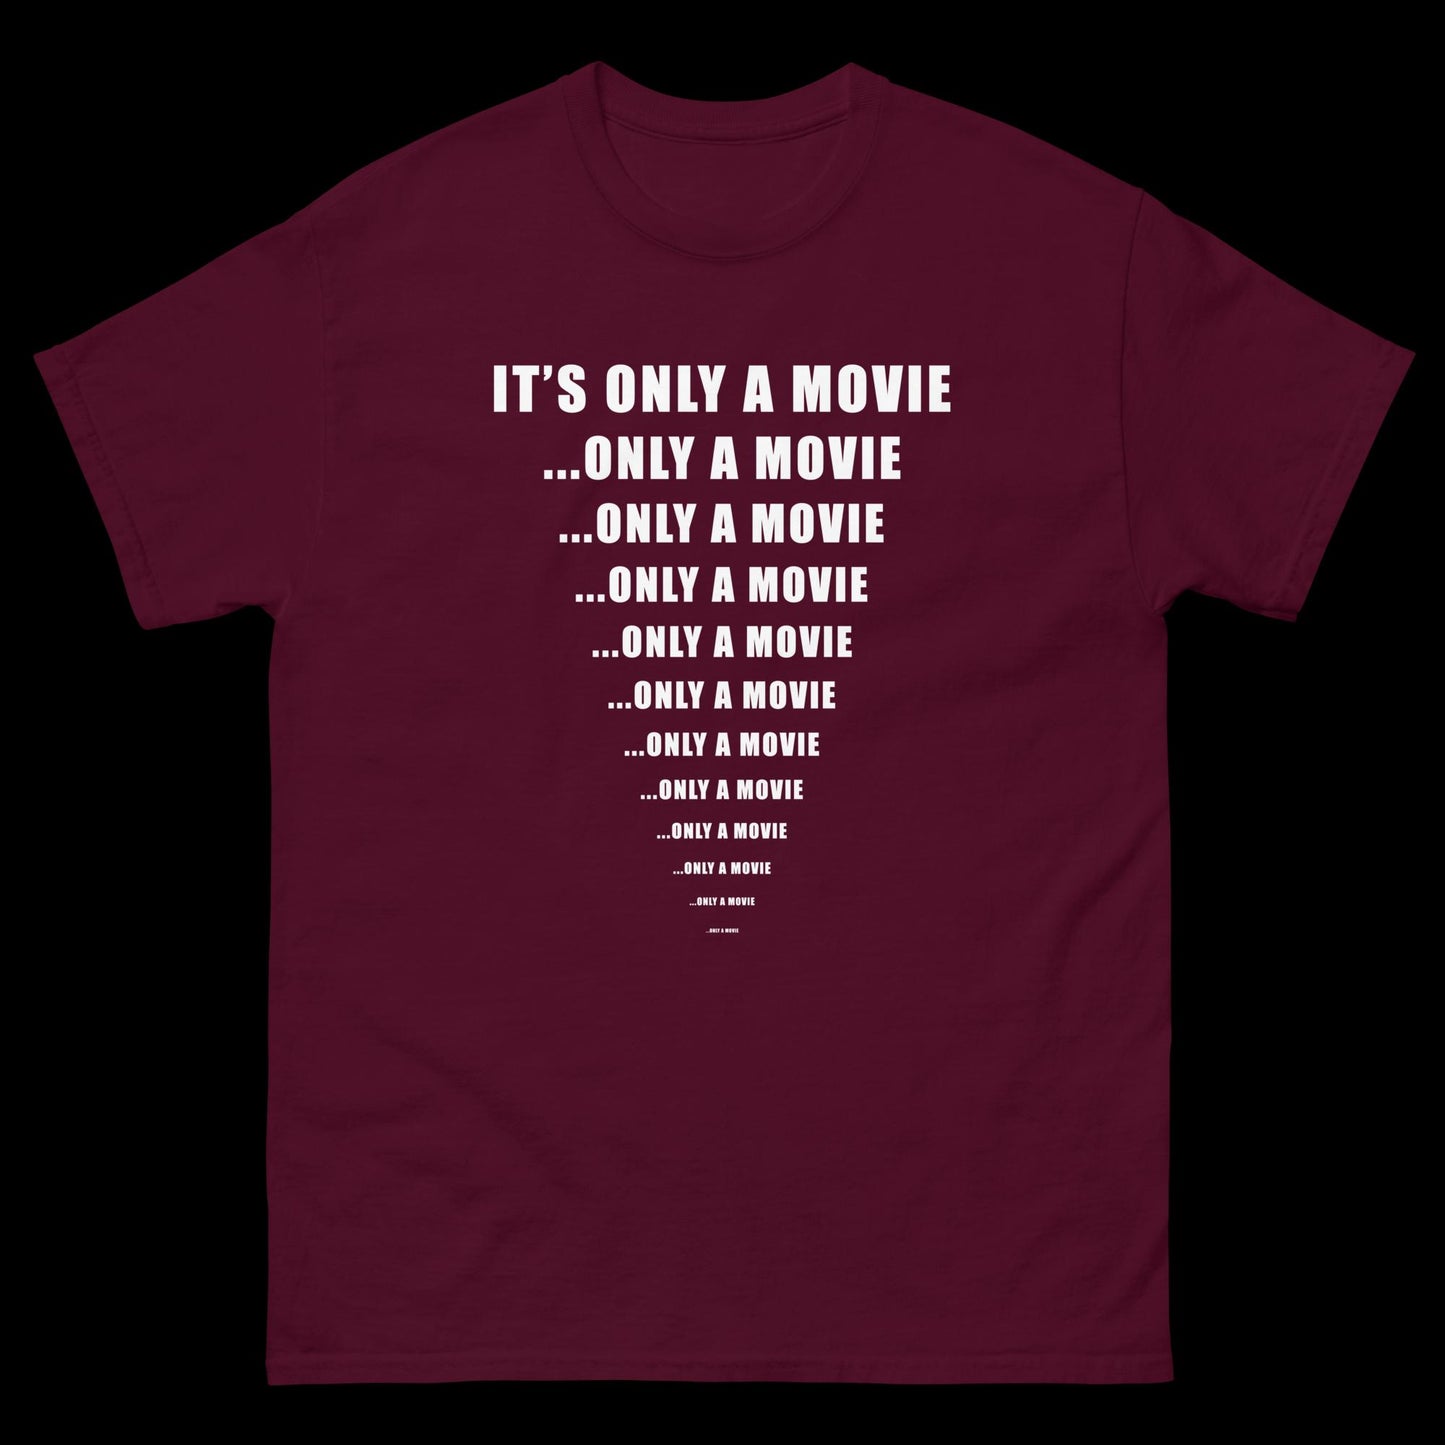 It's Only A Movie - Classic T-Shirt